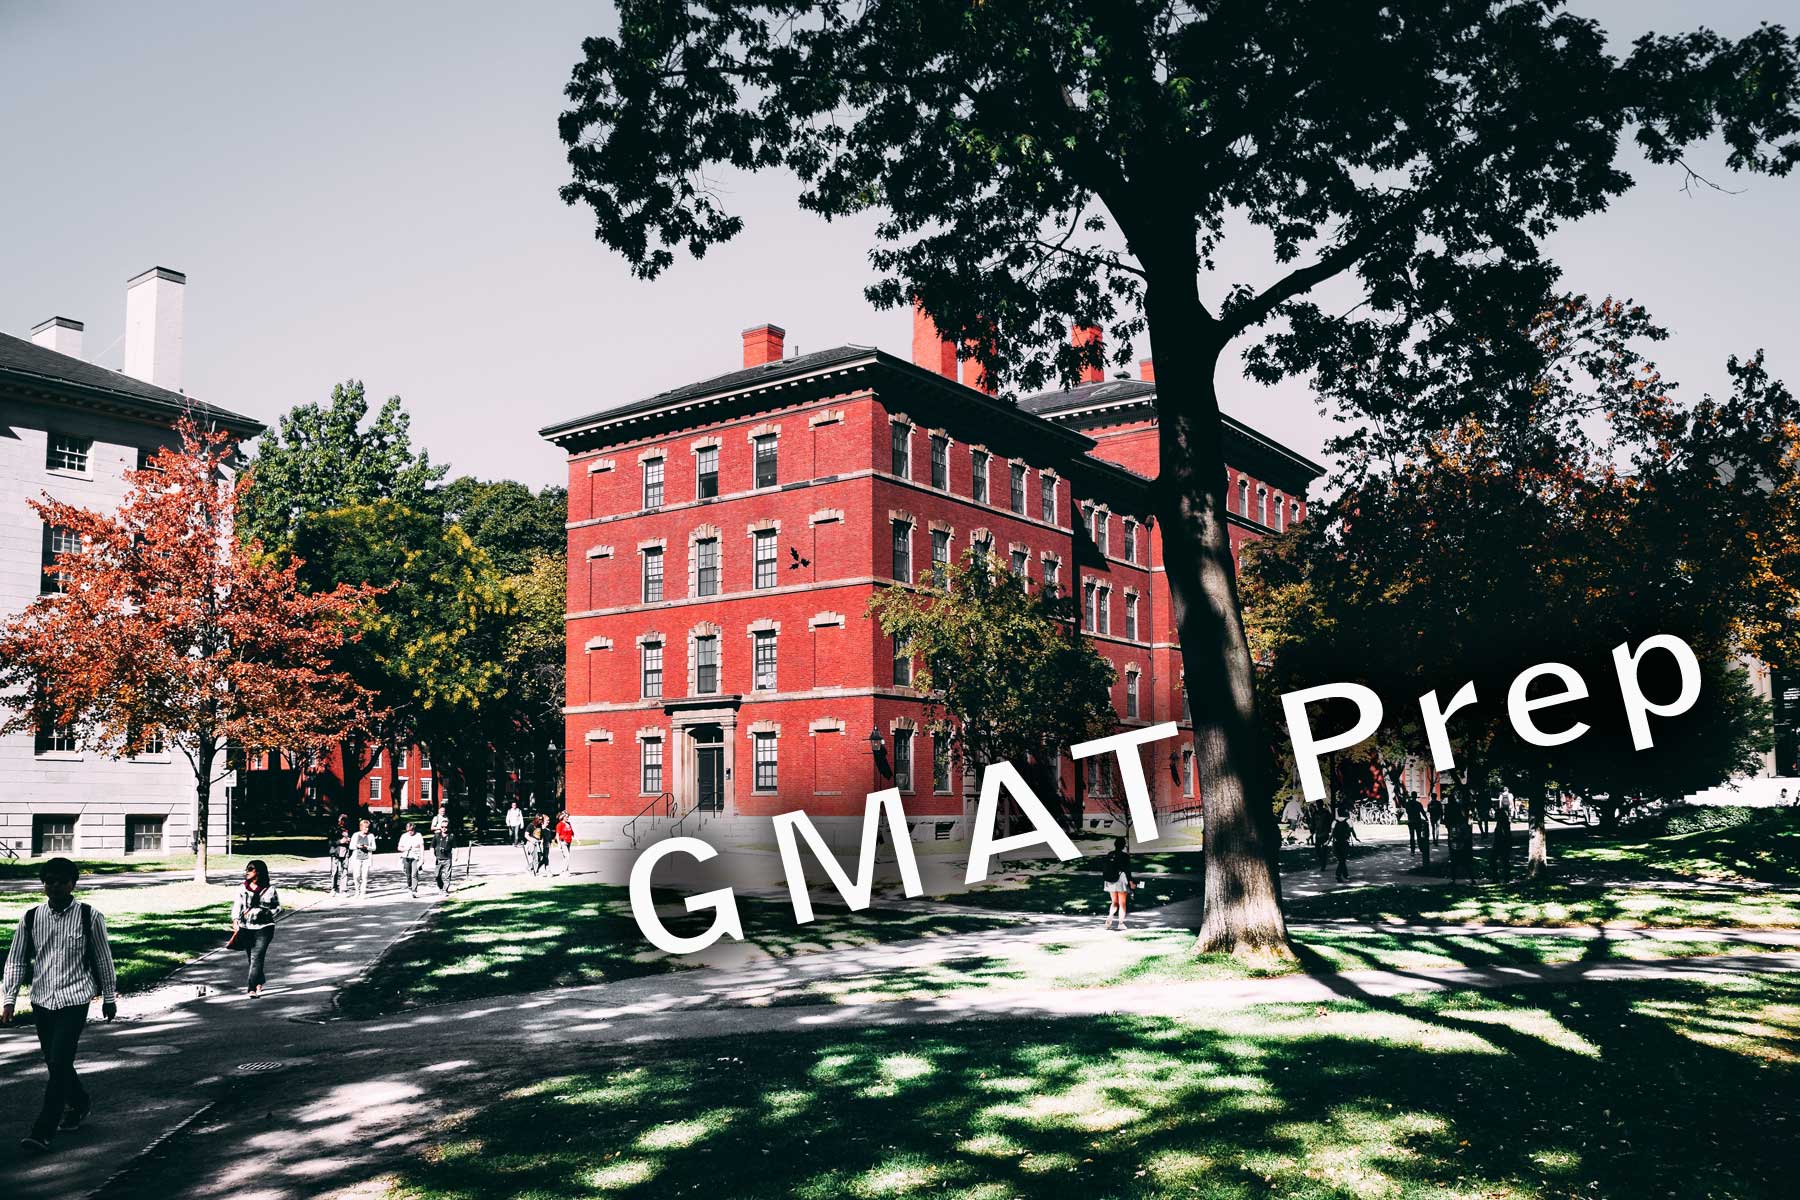 GMAT Math Typical Questions and Answers